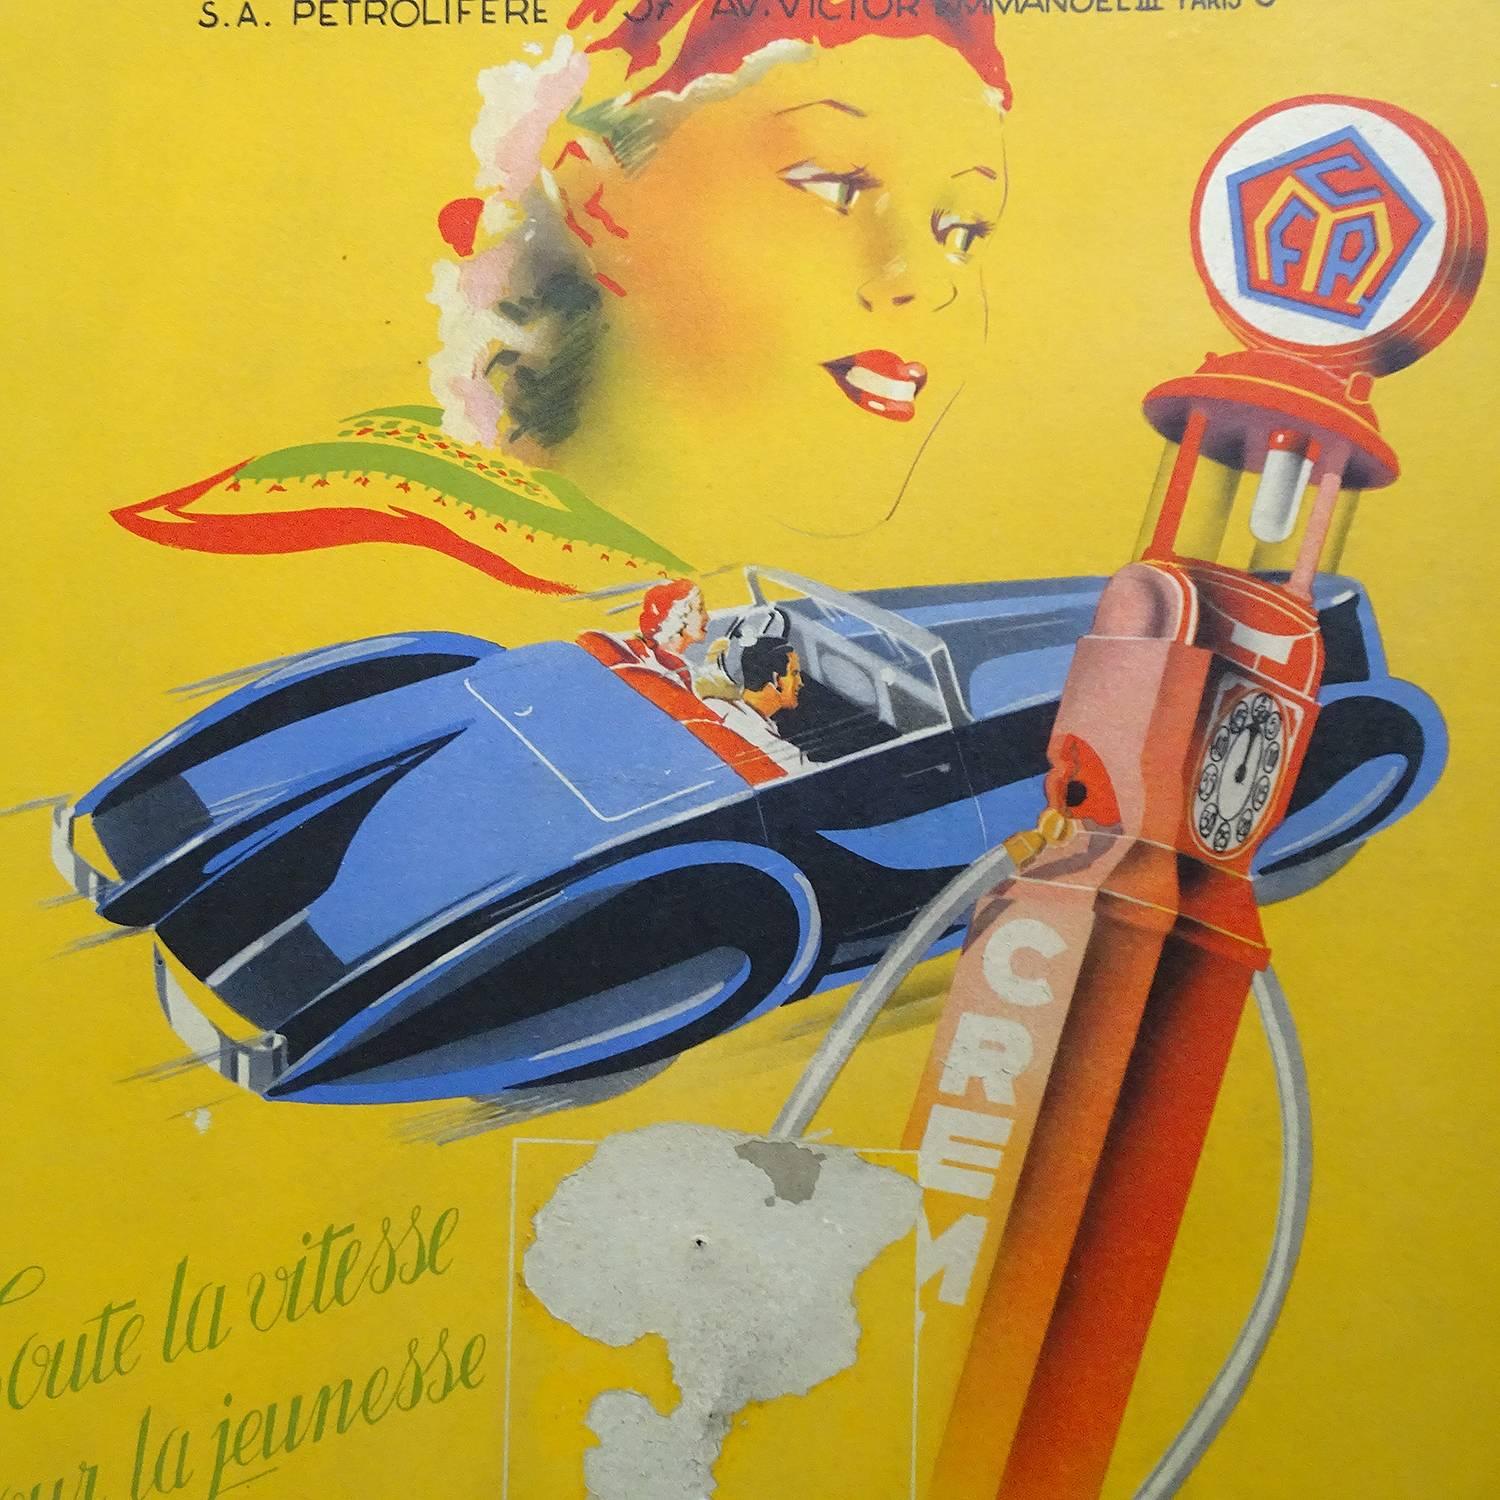 Mid-20th Century French Vintage Car Delahaye Bugatti Advertising Calendar Wall Display Poster For Sale